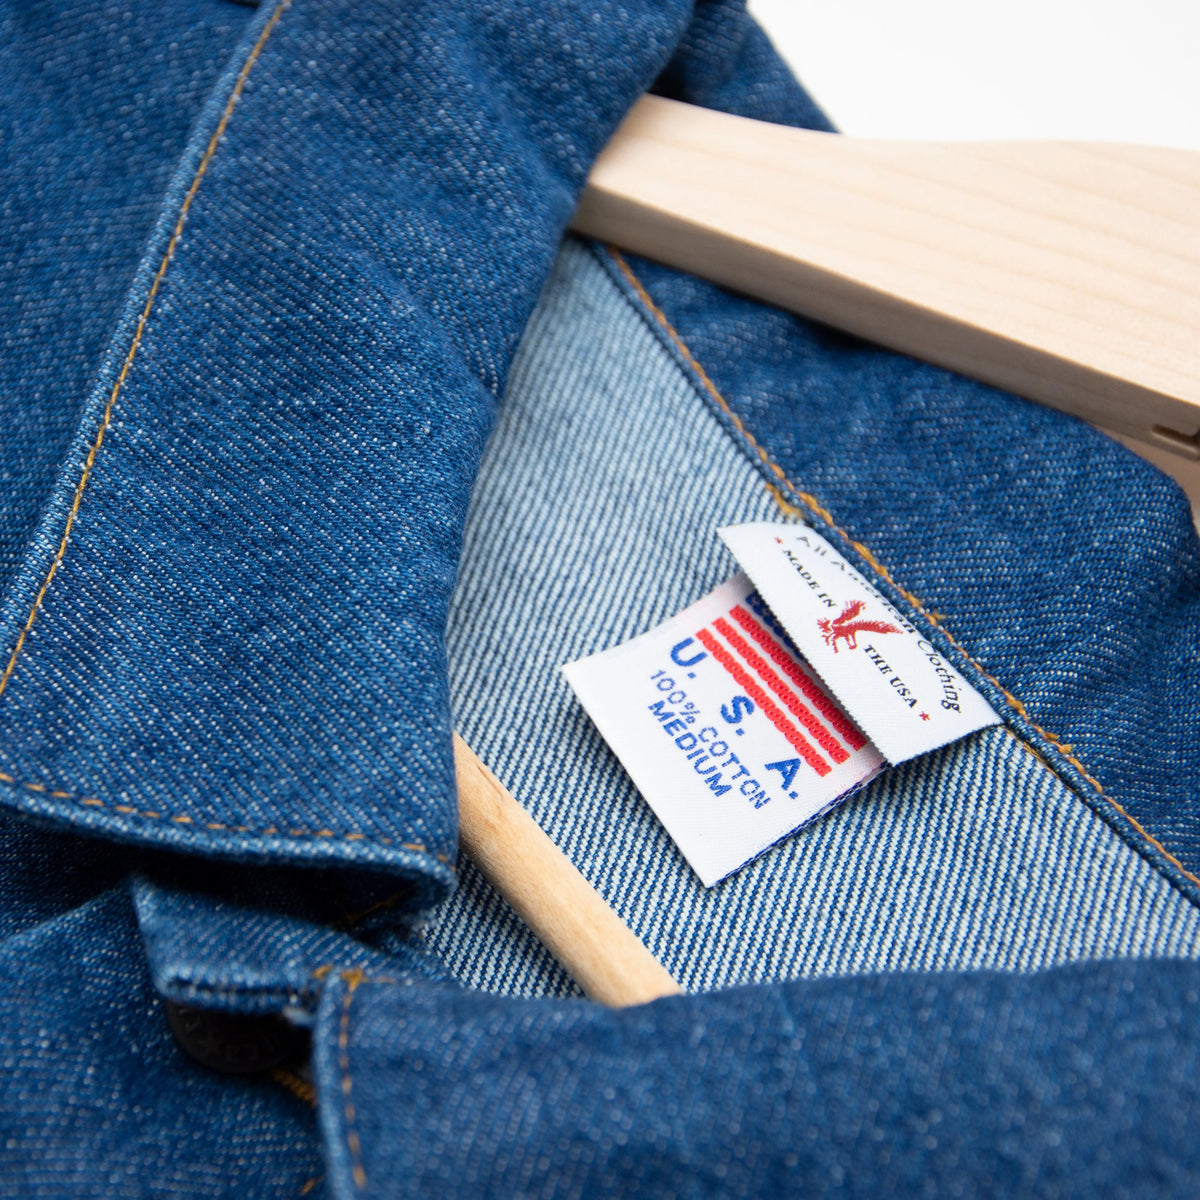 Denim Fabric Defects Reference Guide - Testex